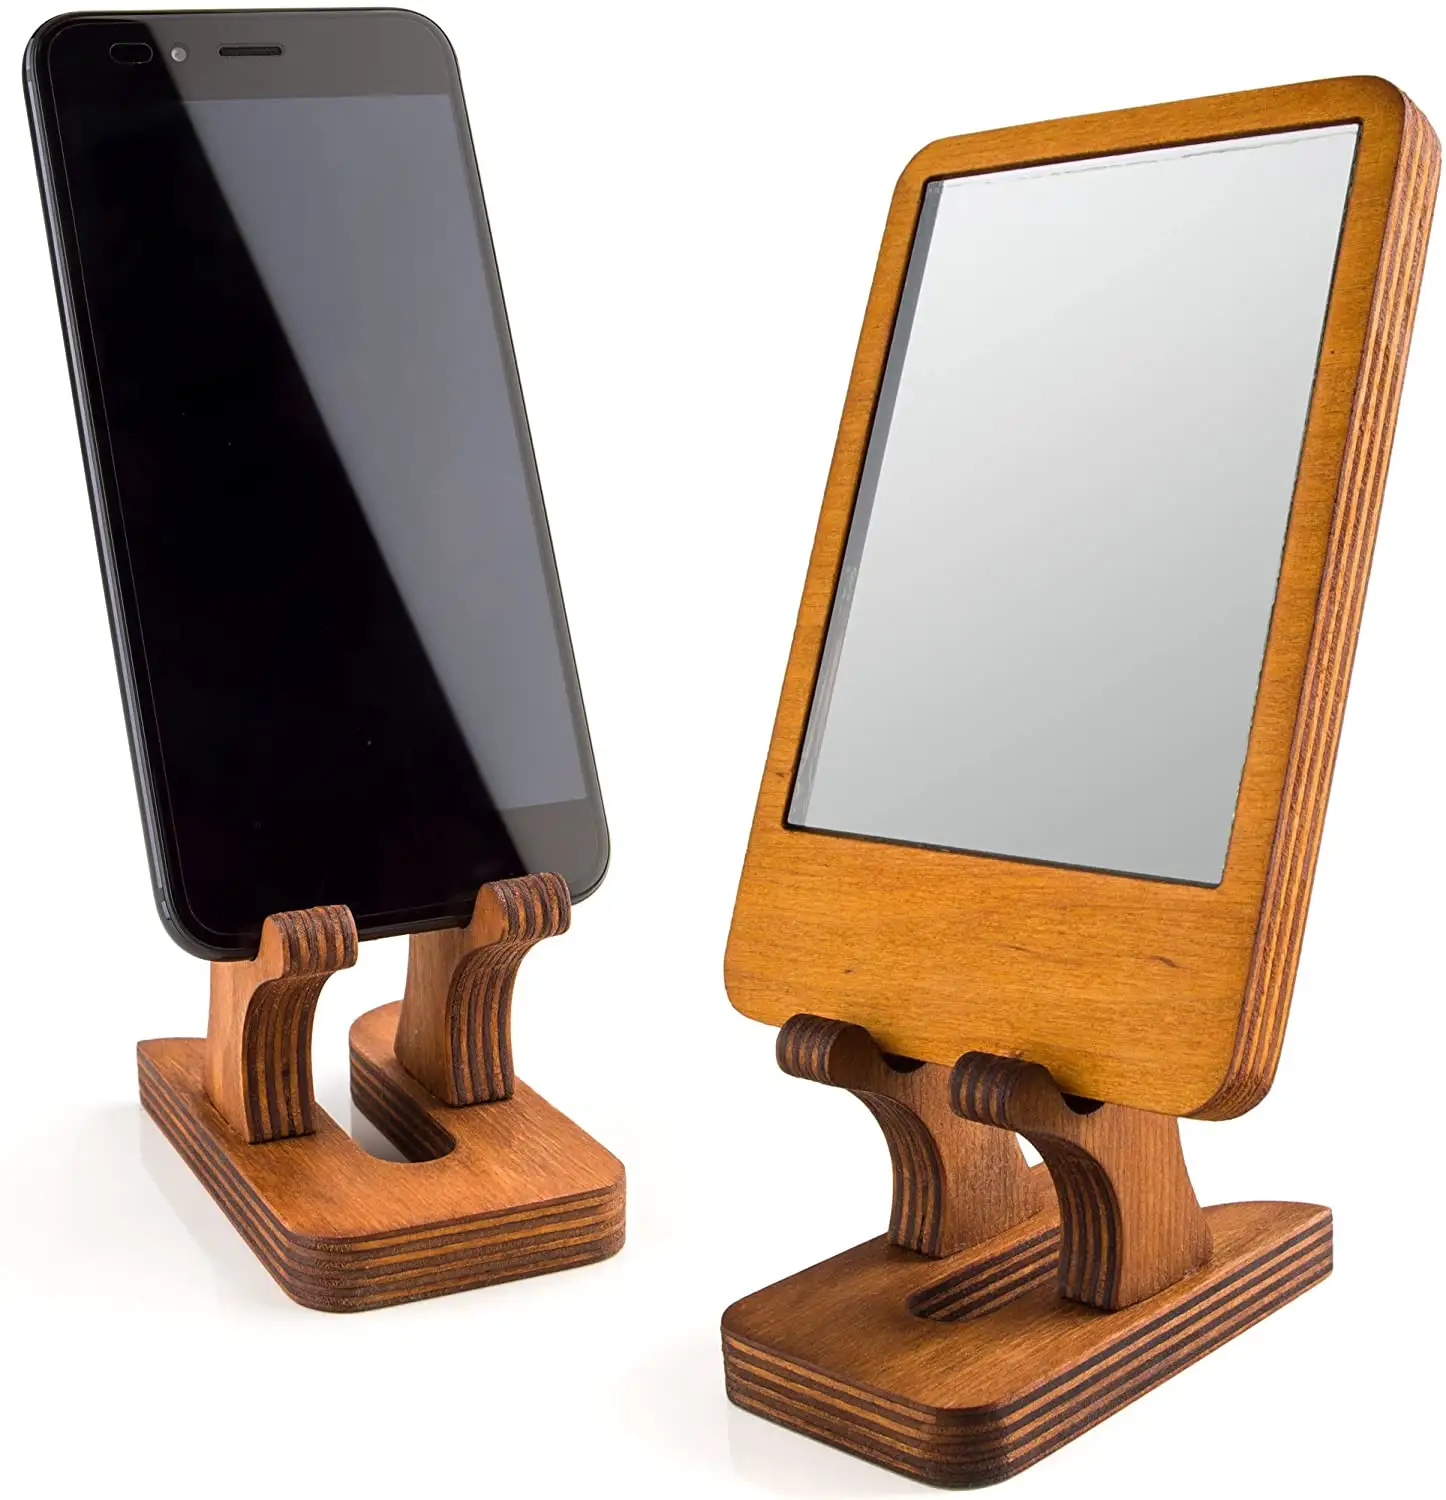 Wooden Cell Phone Holder Tablet Stand for Desktop Ideal for iPhone iPad Samsung Tablet PCs Artwork Makeup Mirror Photo